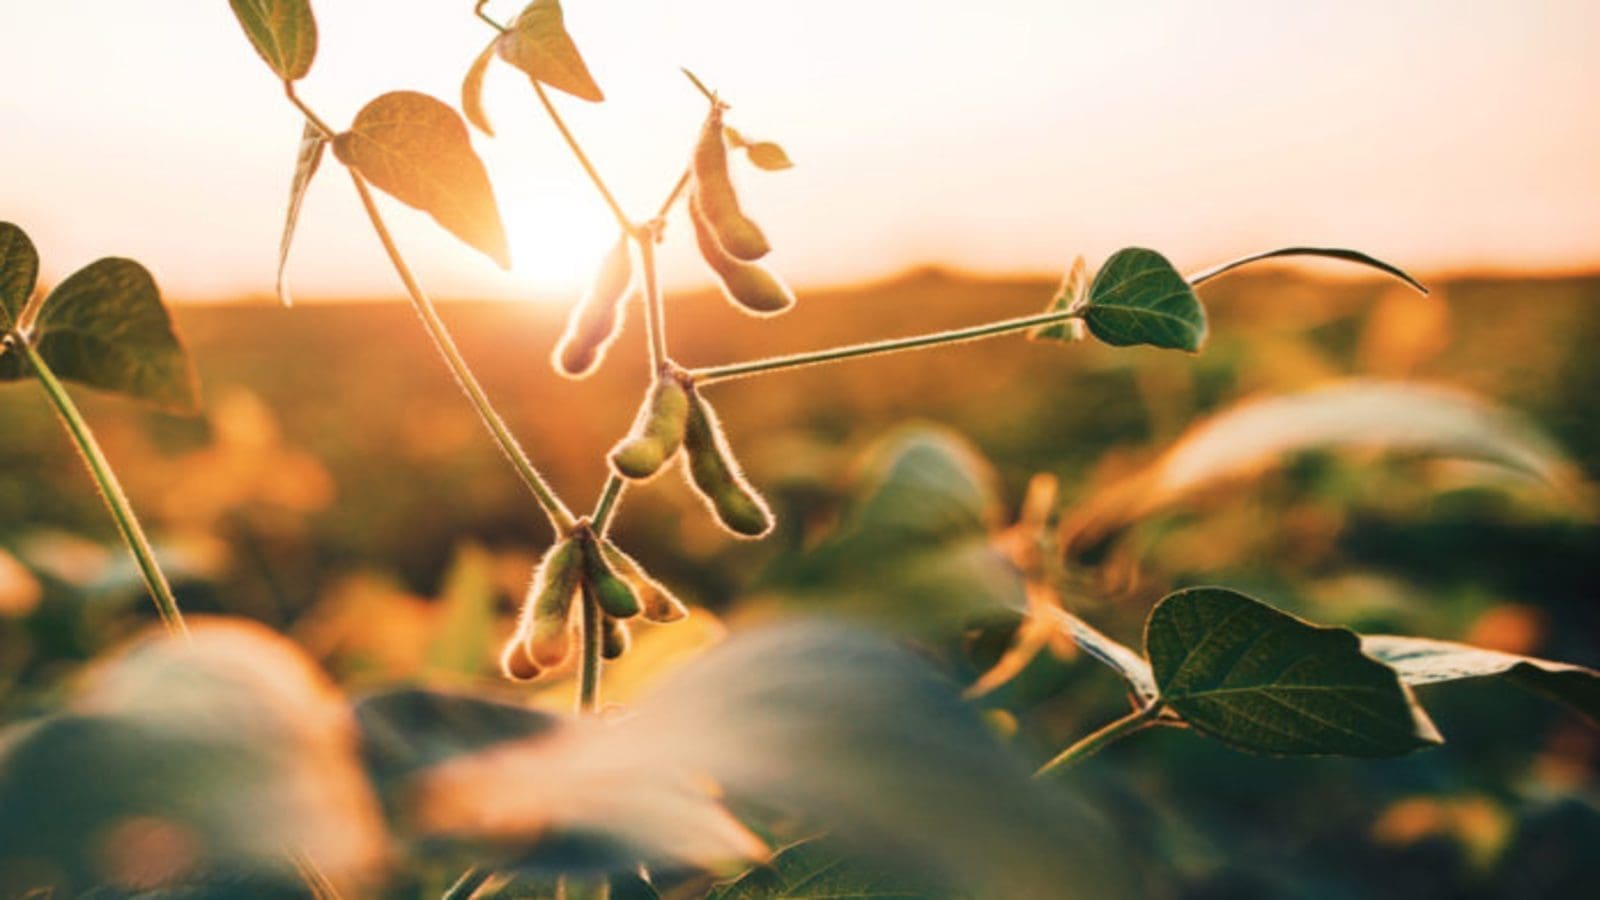 ADM, Bayer partner on sustainable soybean management program in India